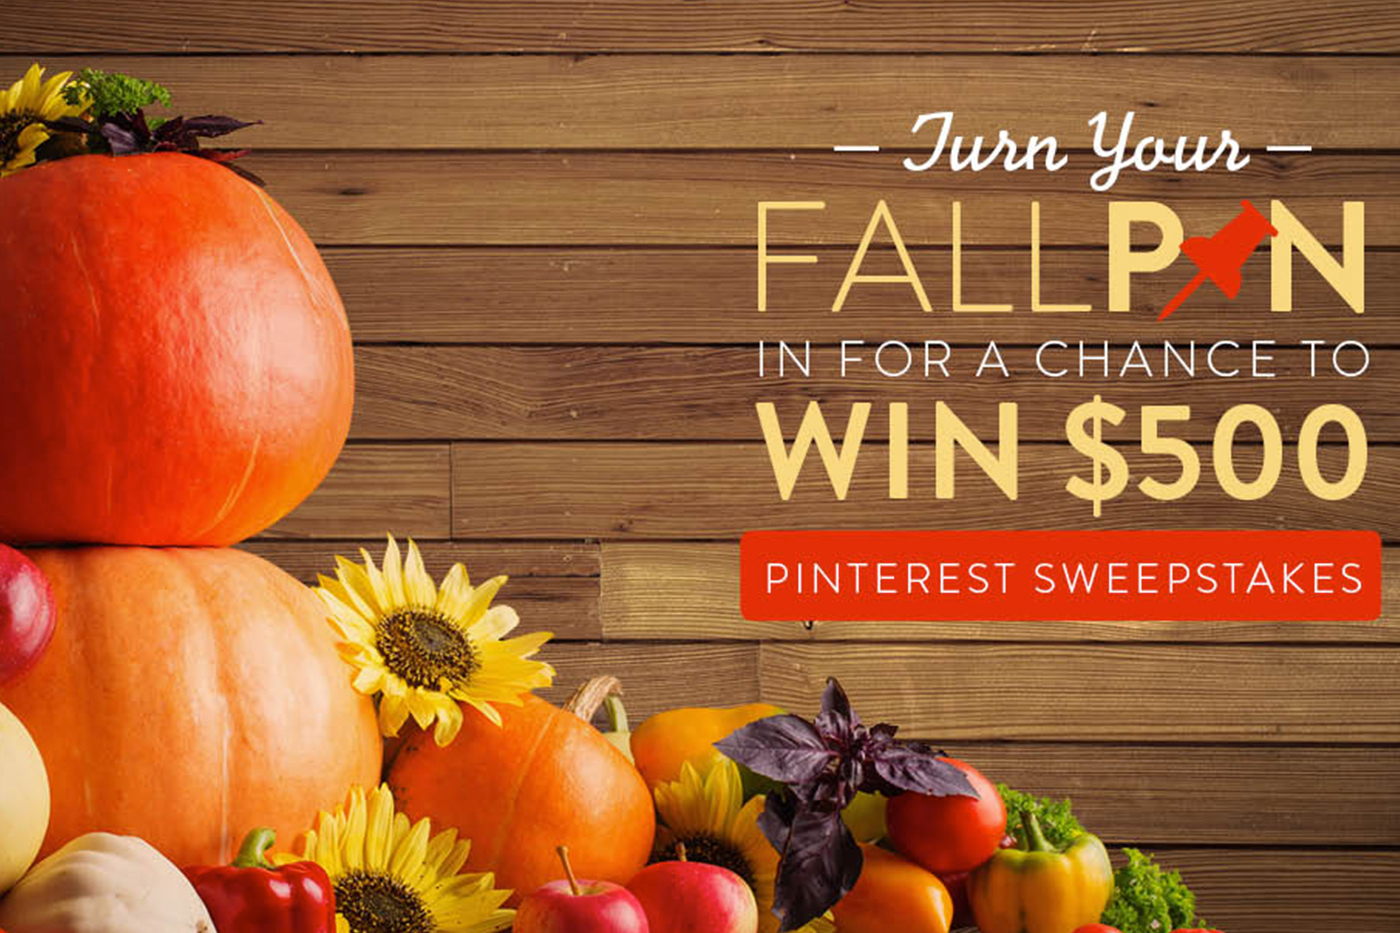 Fall in Love with Our Fall Pin Love Sweepstakes! - http://bit.ly/FallPinLoveSweeps